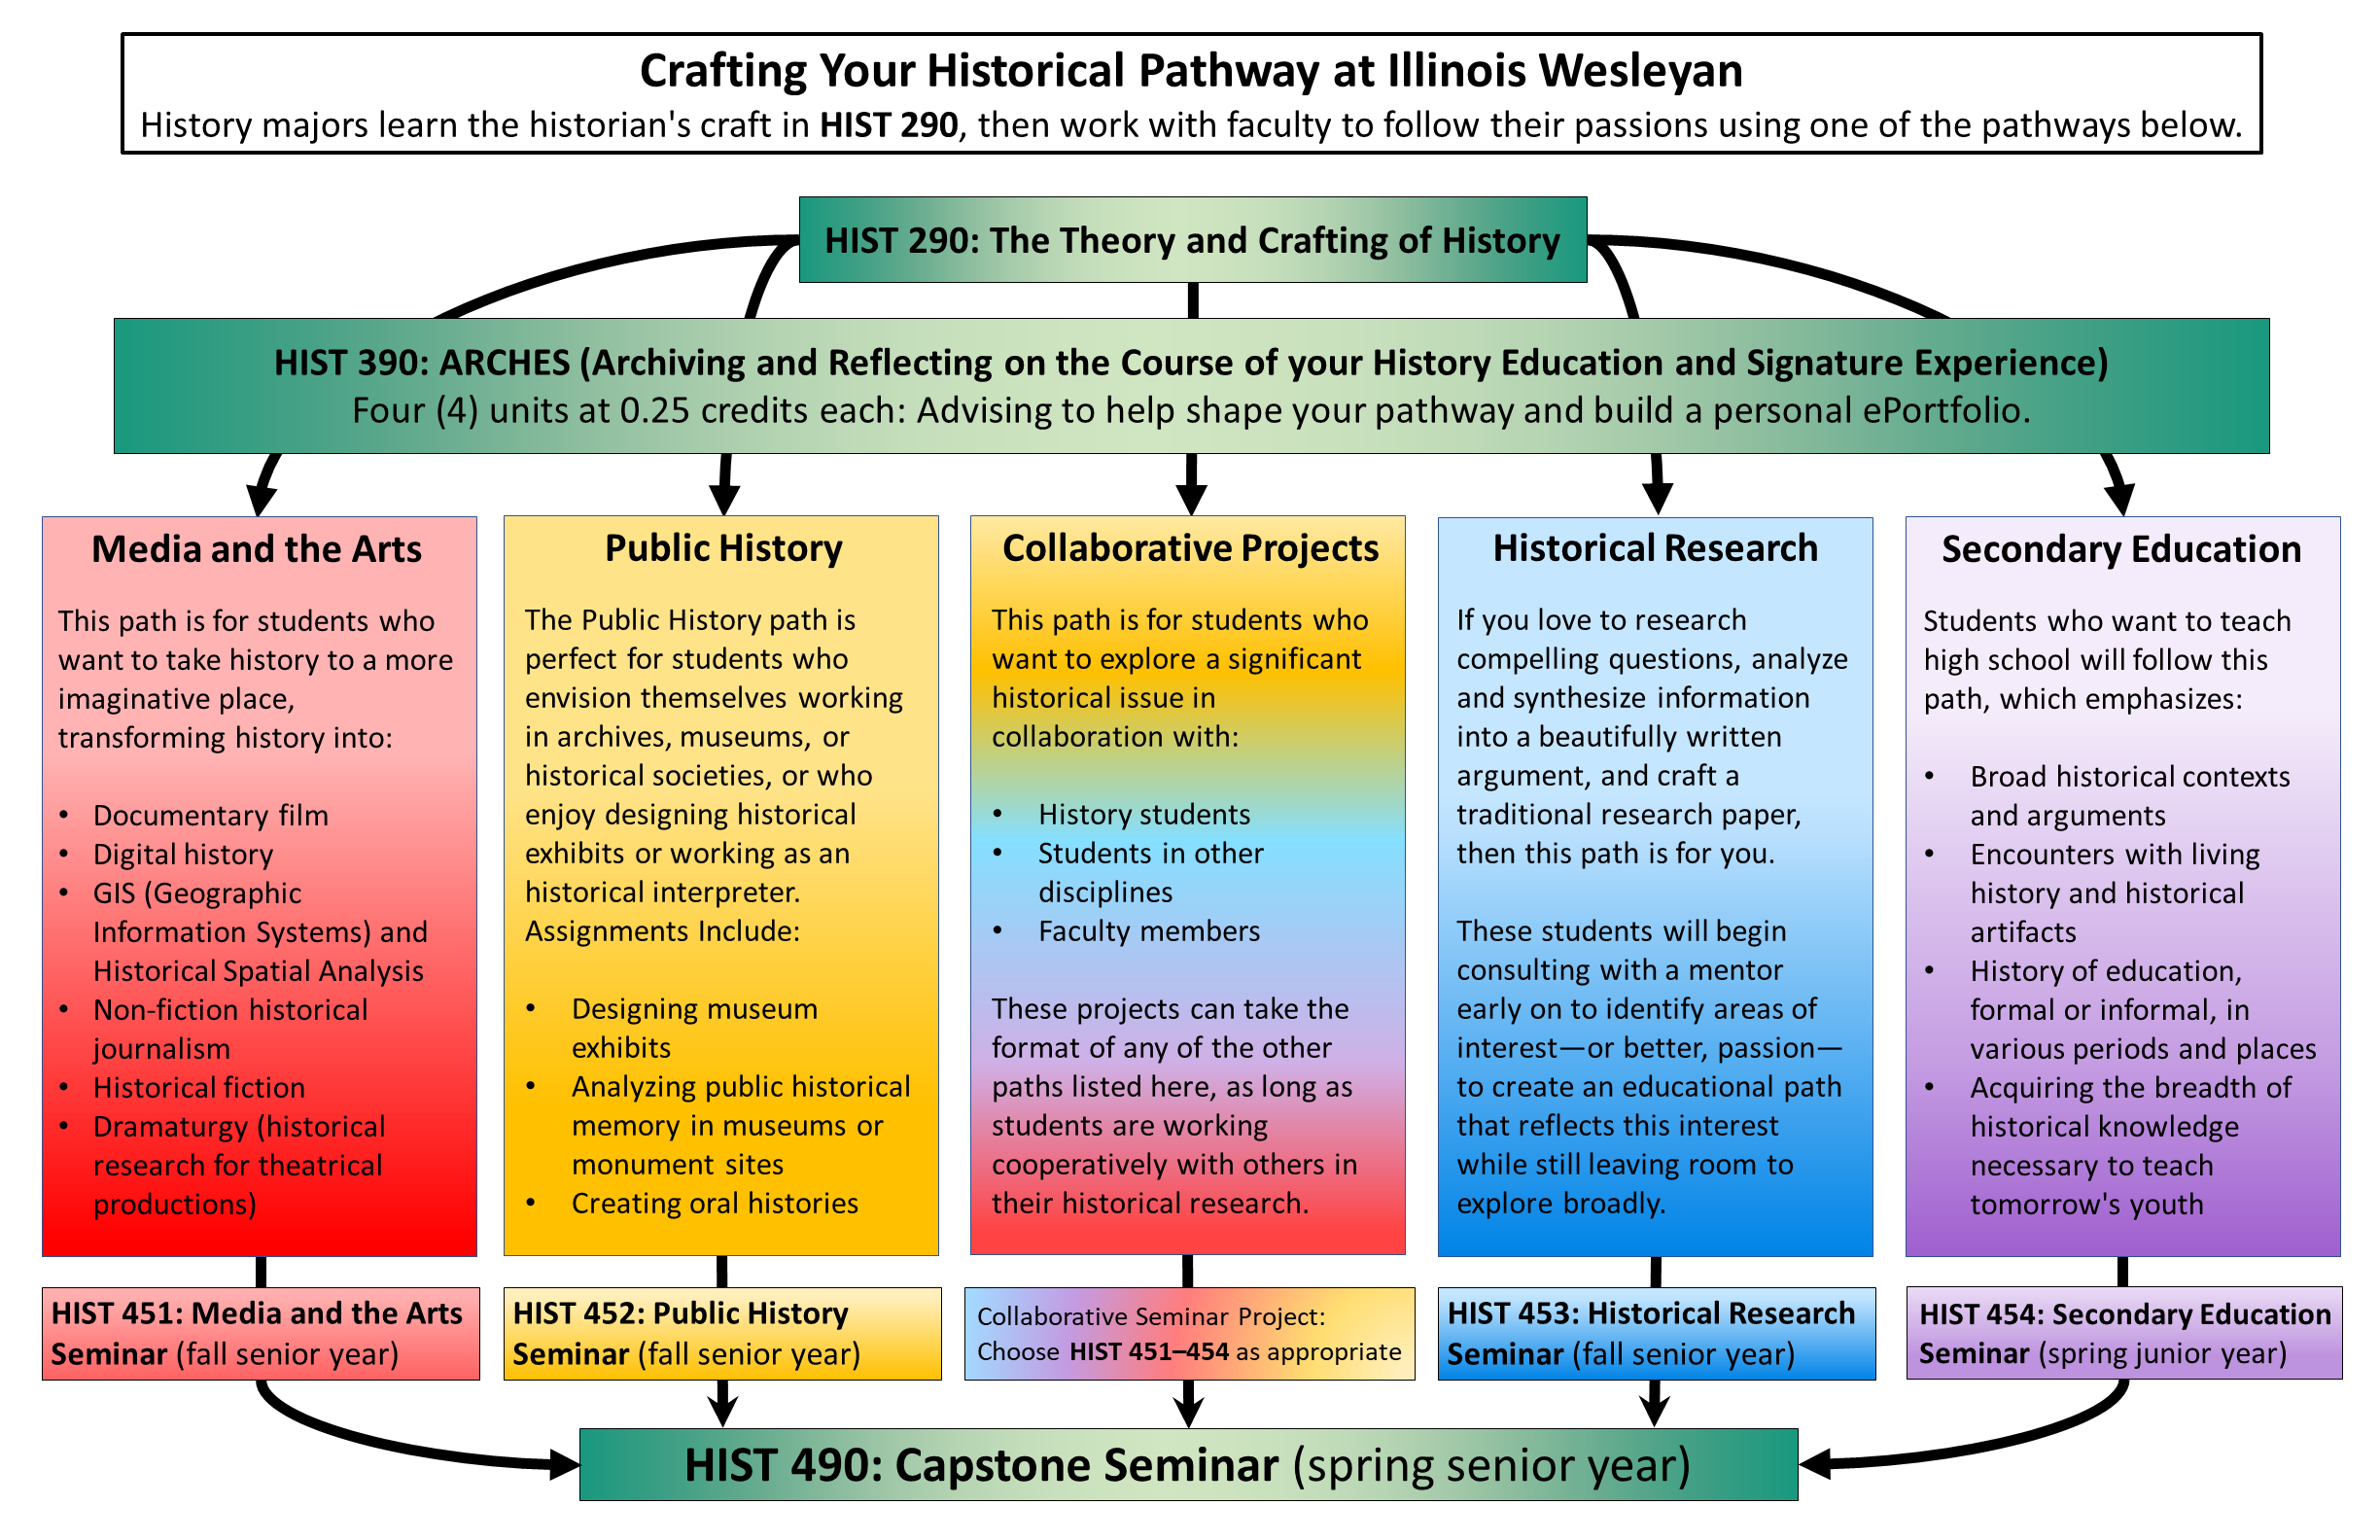 Chart depicting the Department of History Signature Experience Crafting Your Historical Pathway at Illinois Wesleyan